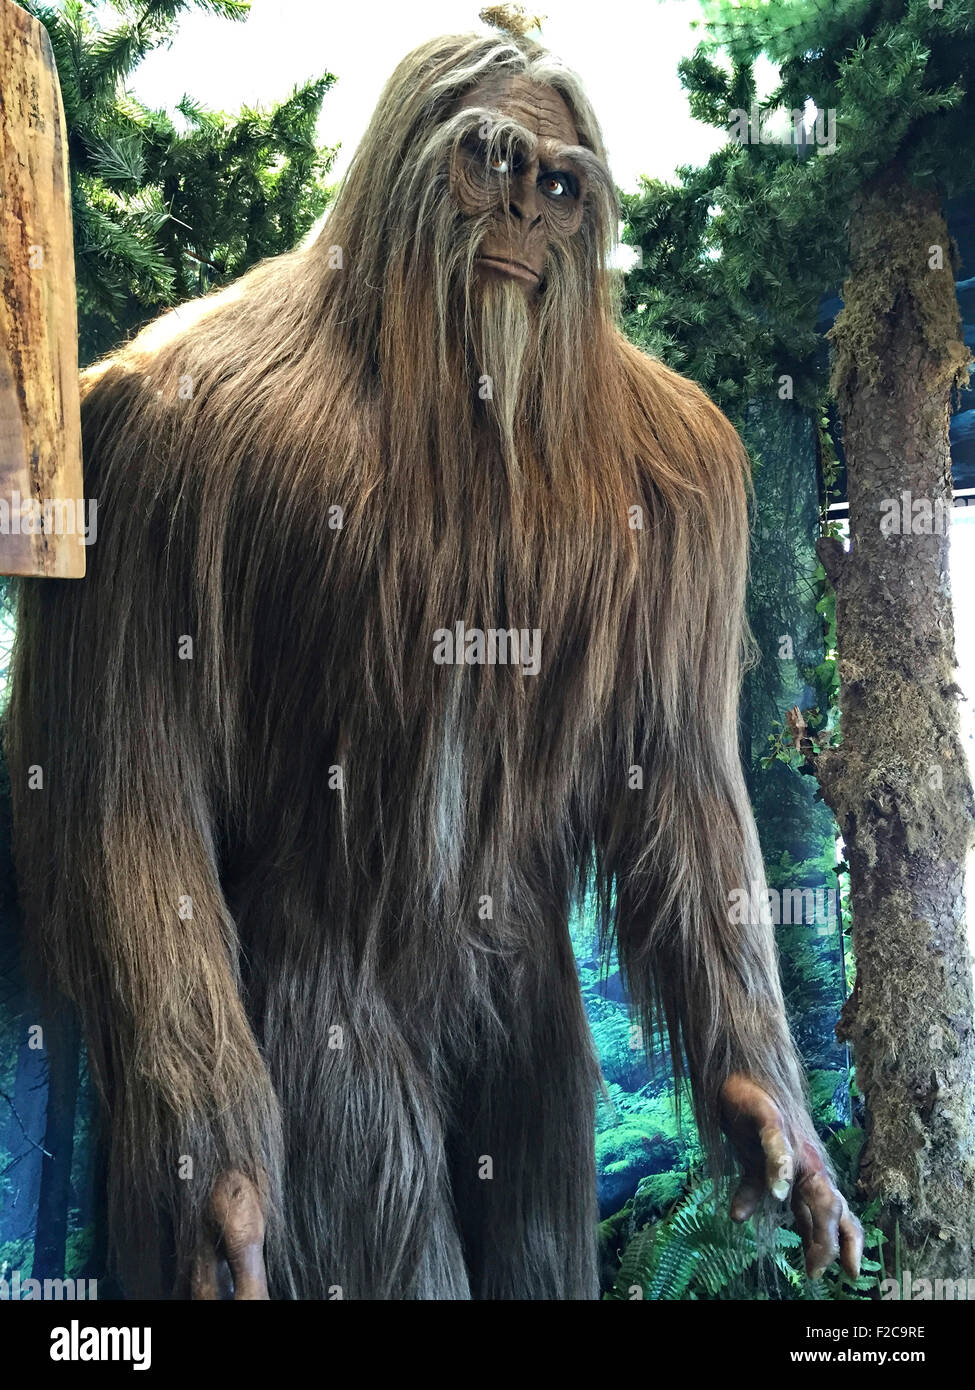 Big Foot or Sasquatch on display at the Ripley's Museum May 24, 2015 in Newport, Oregon. Stock Photo